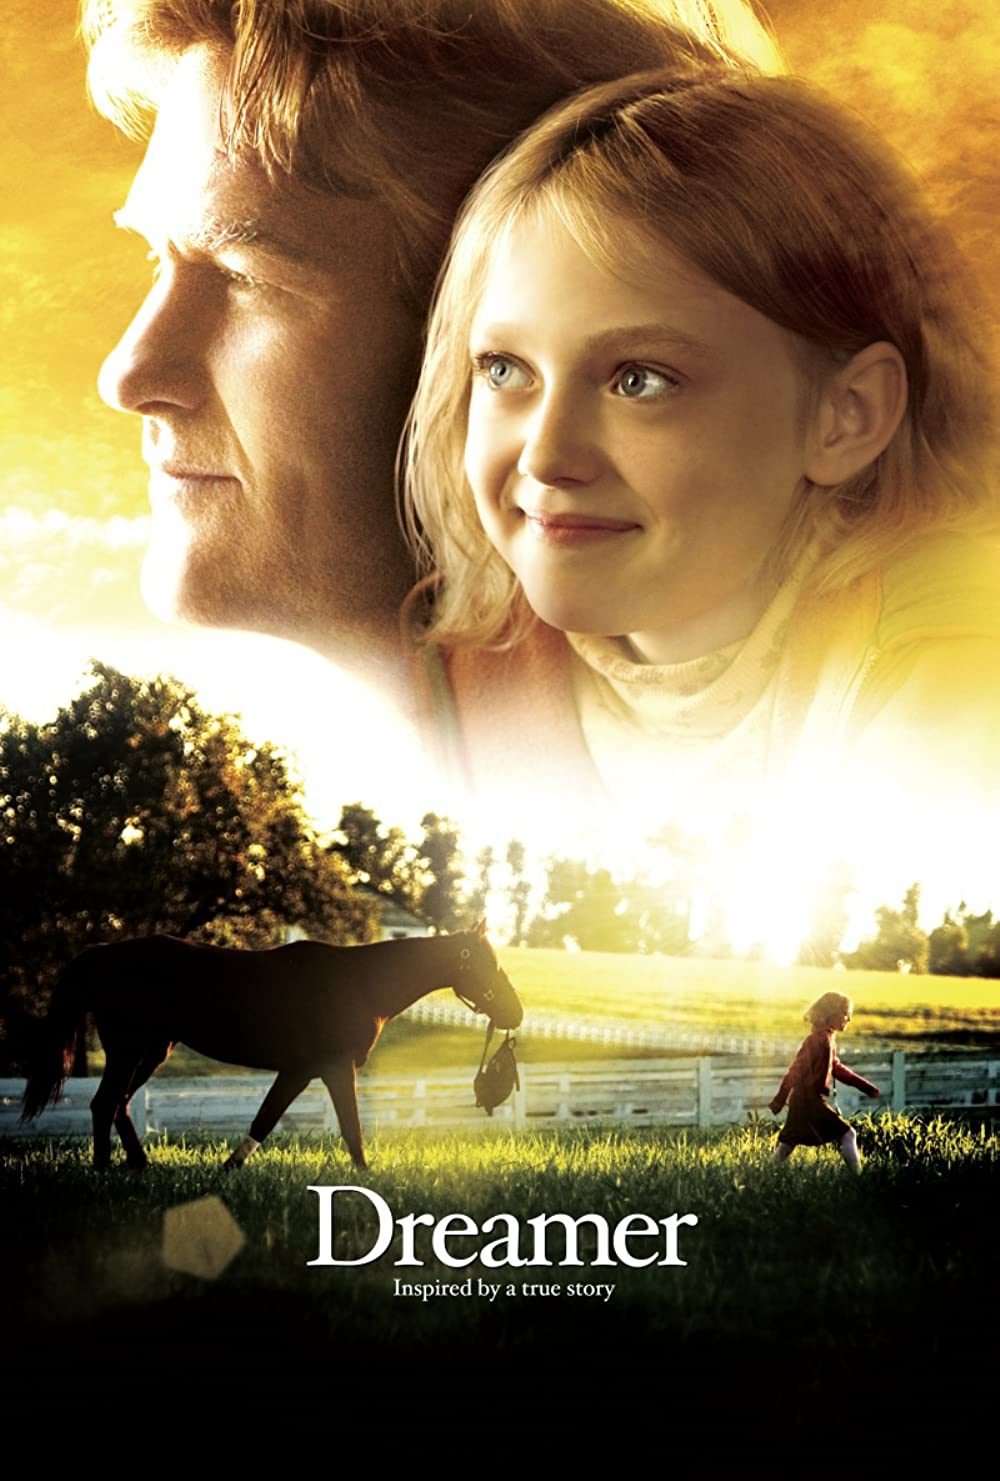 Dreamer (2005) Best Horse Racing Movies to Feel The Life